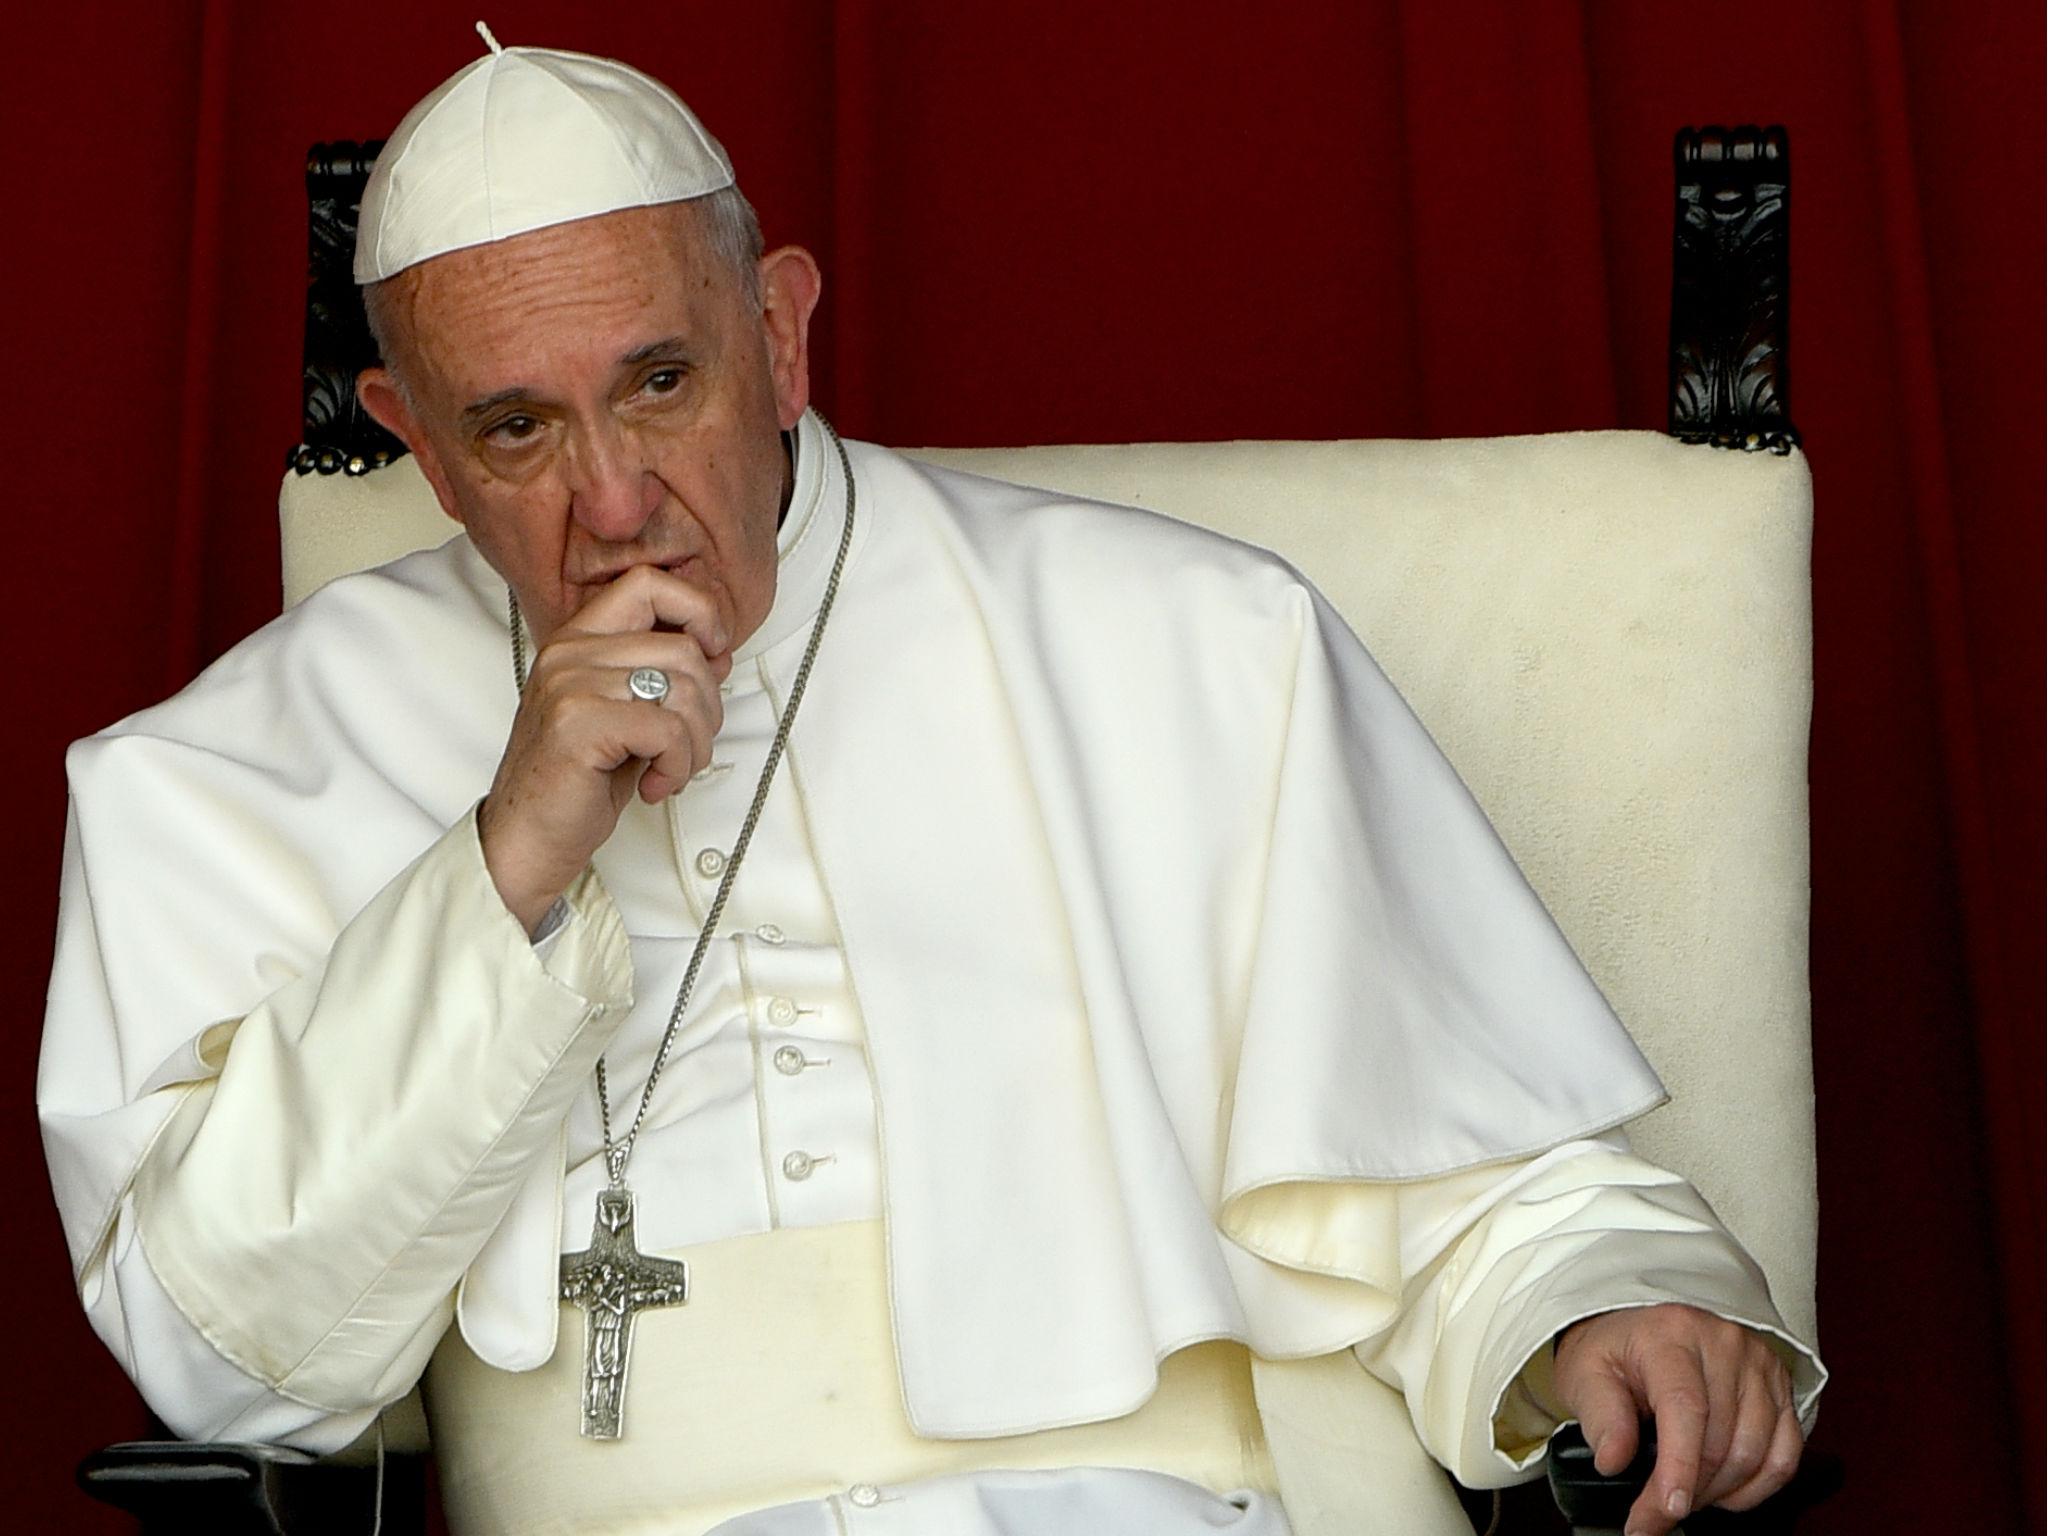 The pope said that anything that takes life shouldn't be called a 'mother'